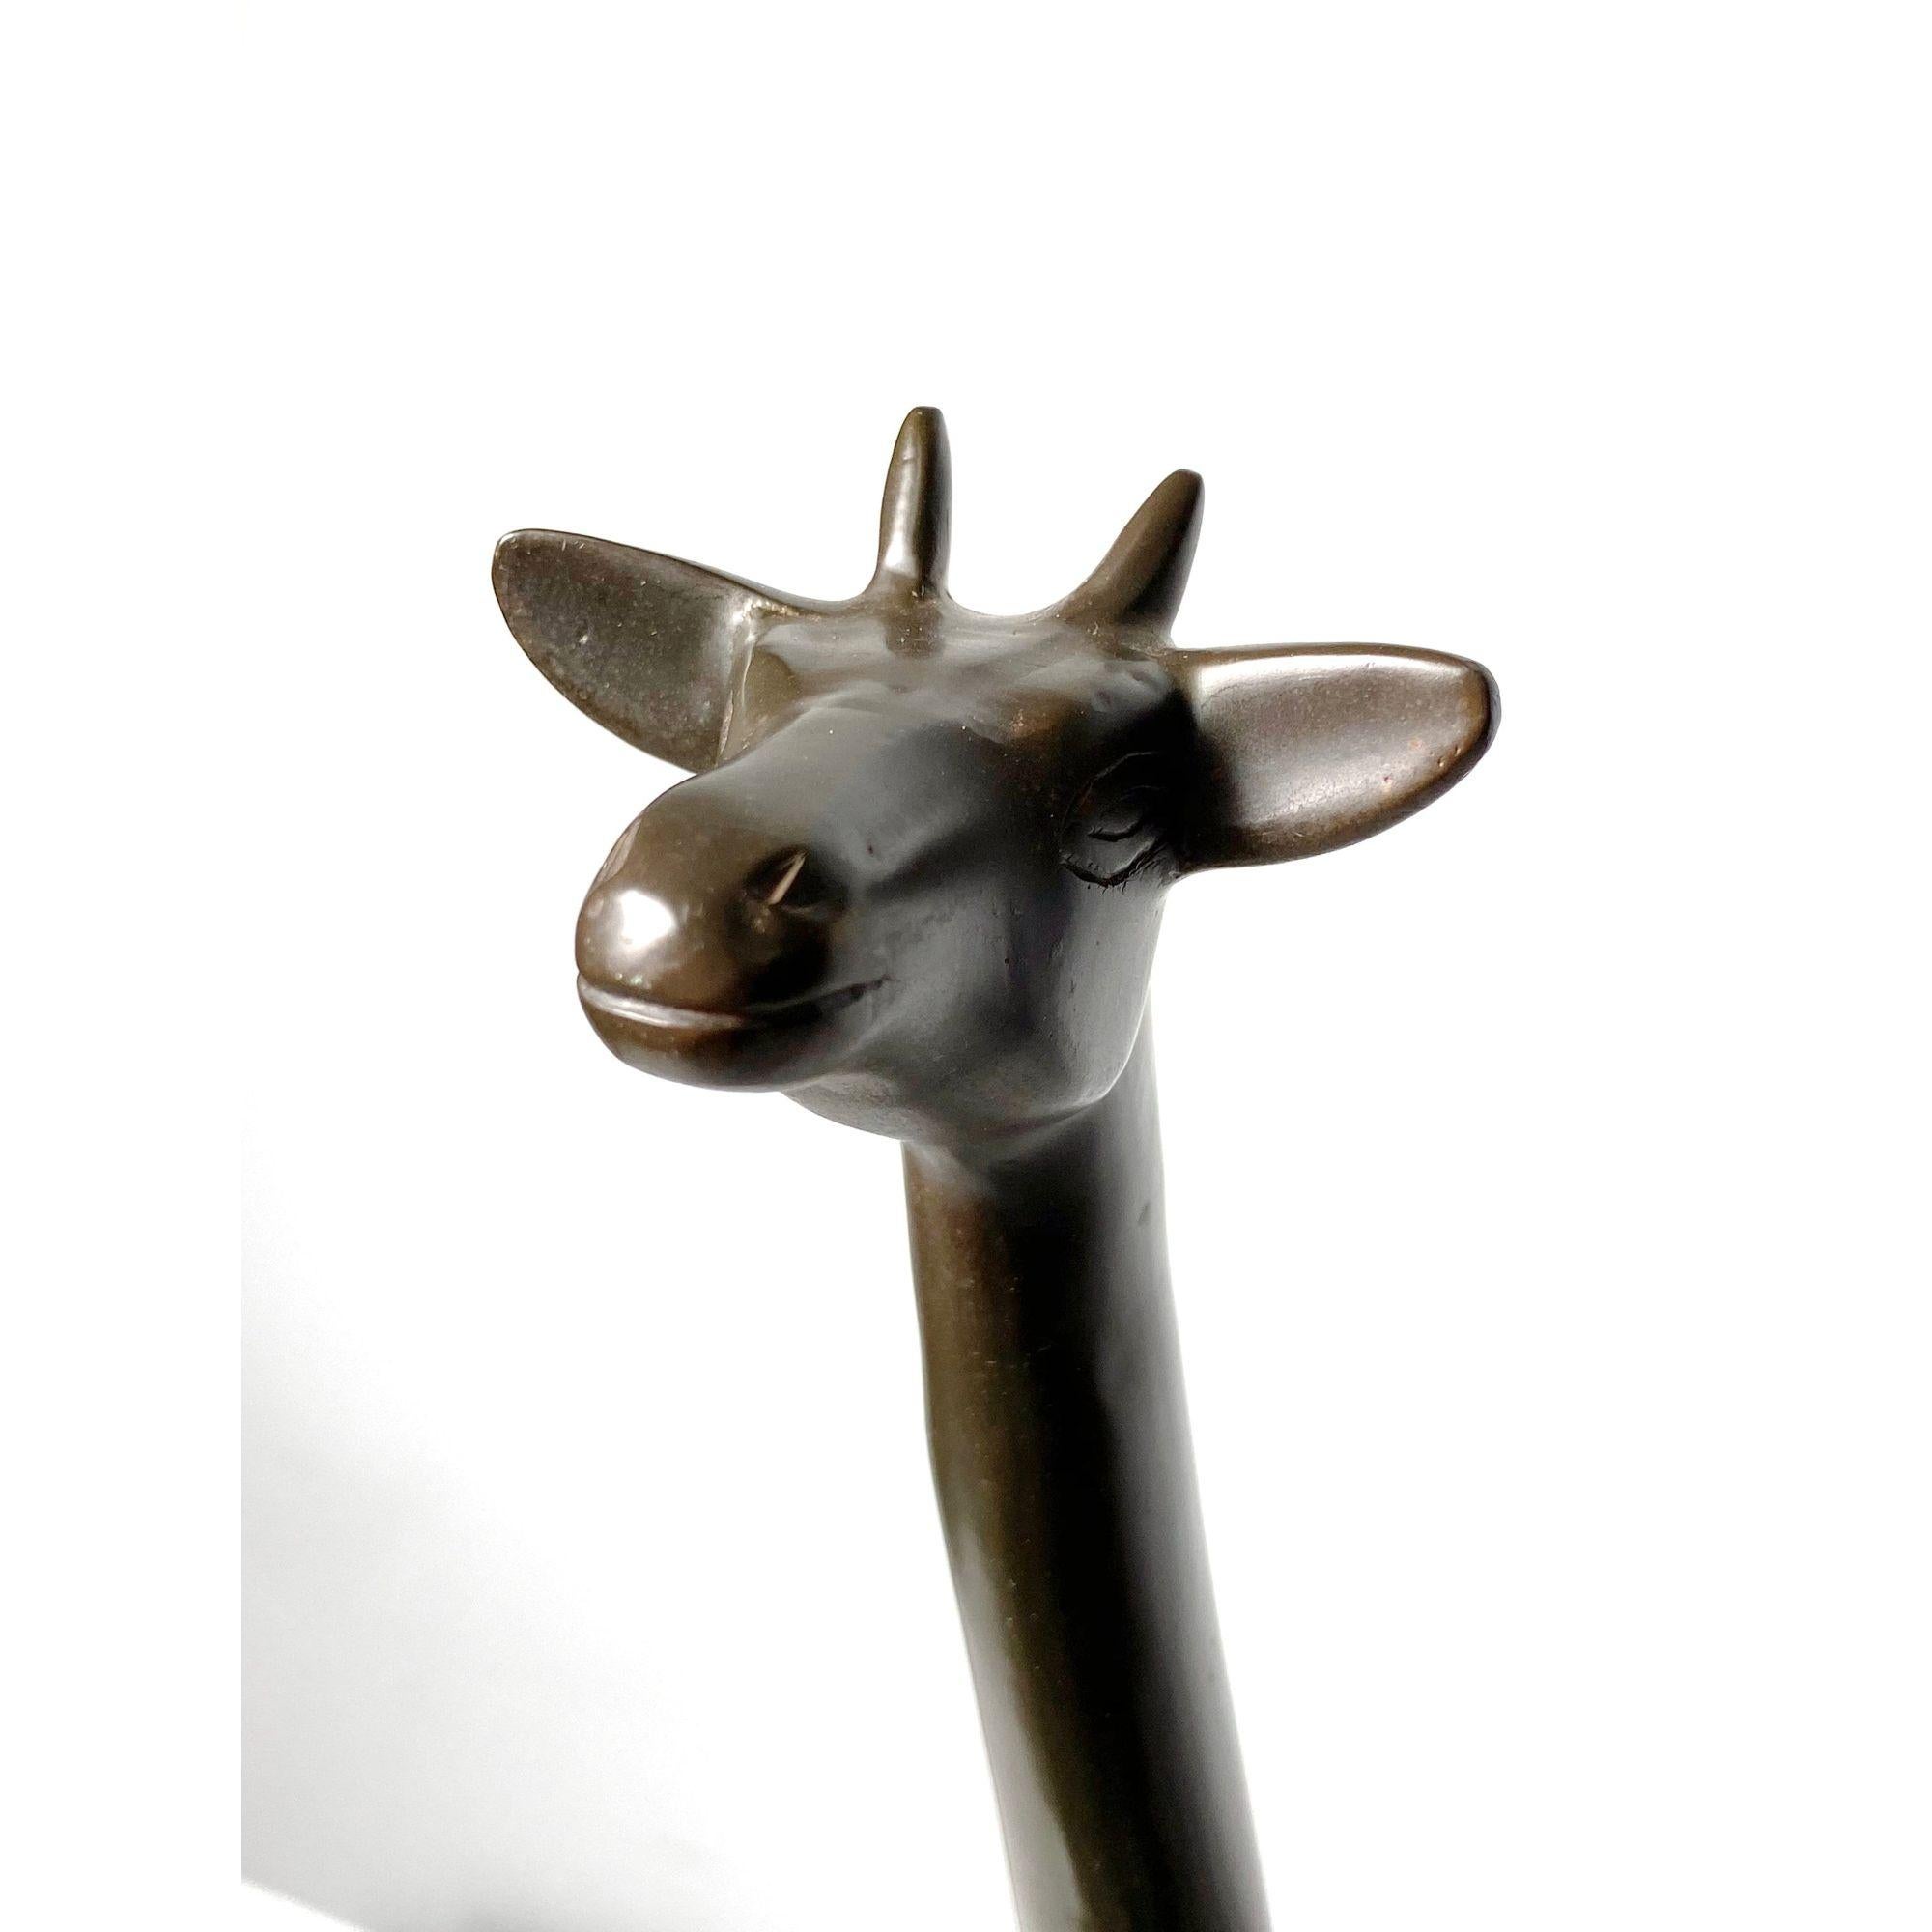 Pair of Vintage Giraffe Sculptures in Bronze and Brass, circa 1970s For Sale 1